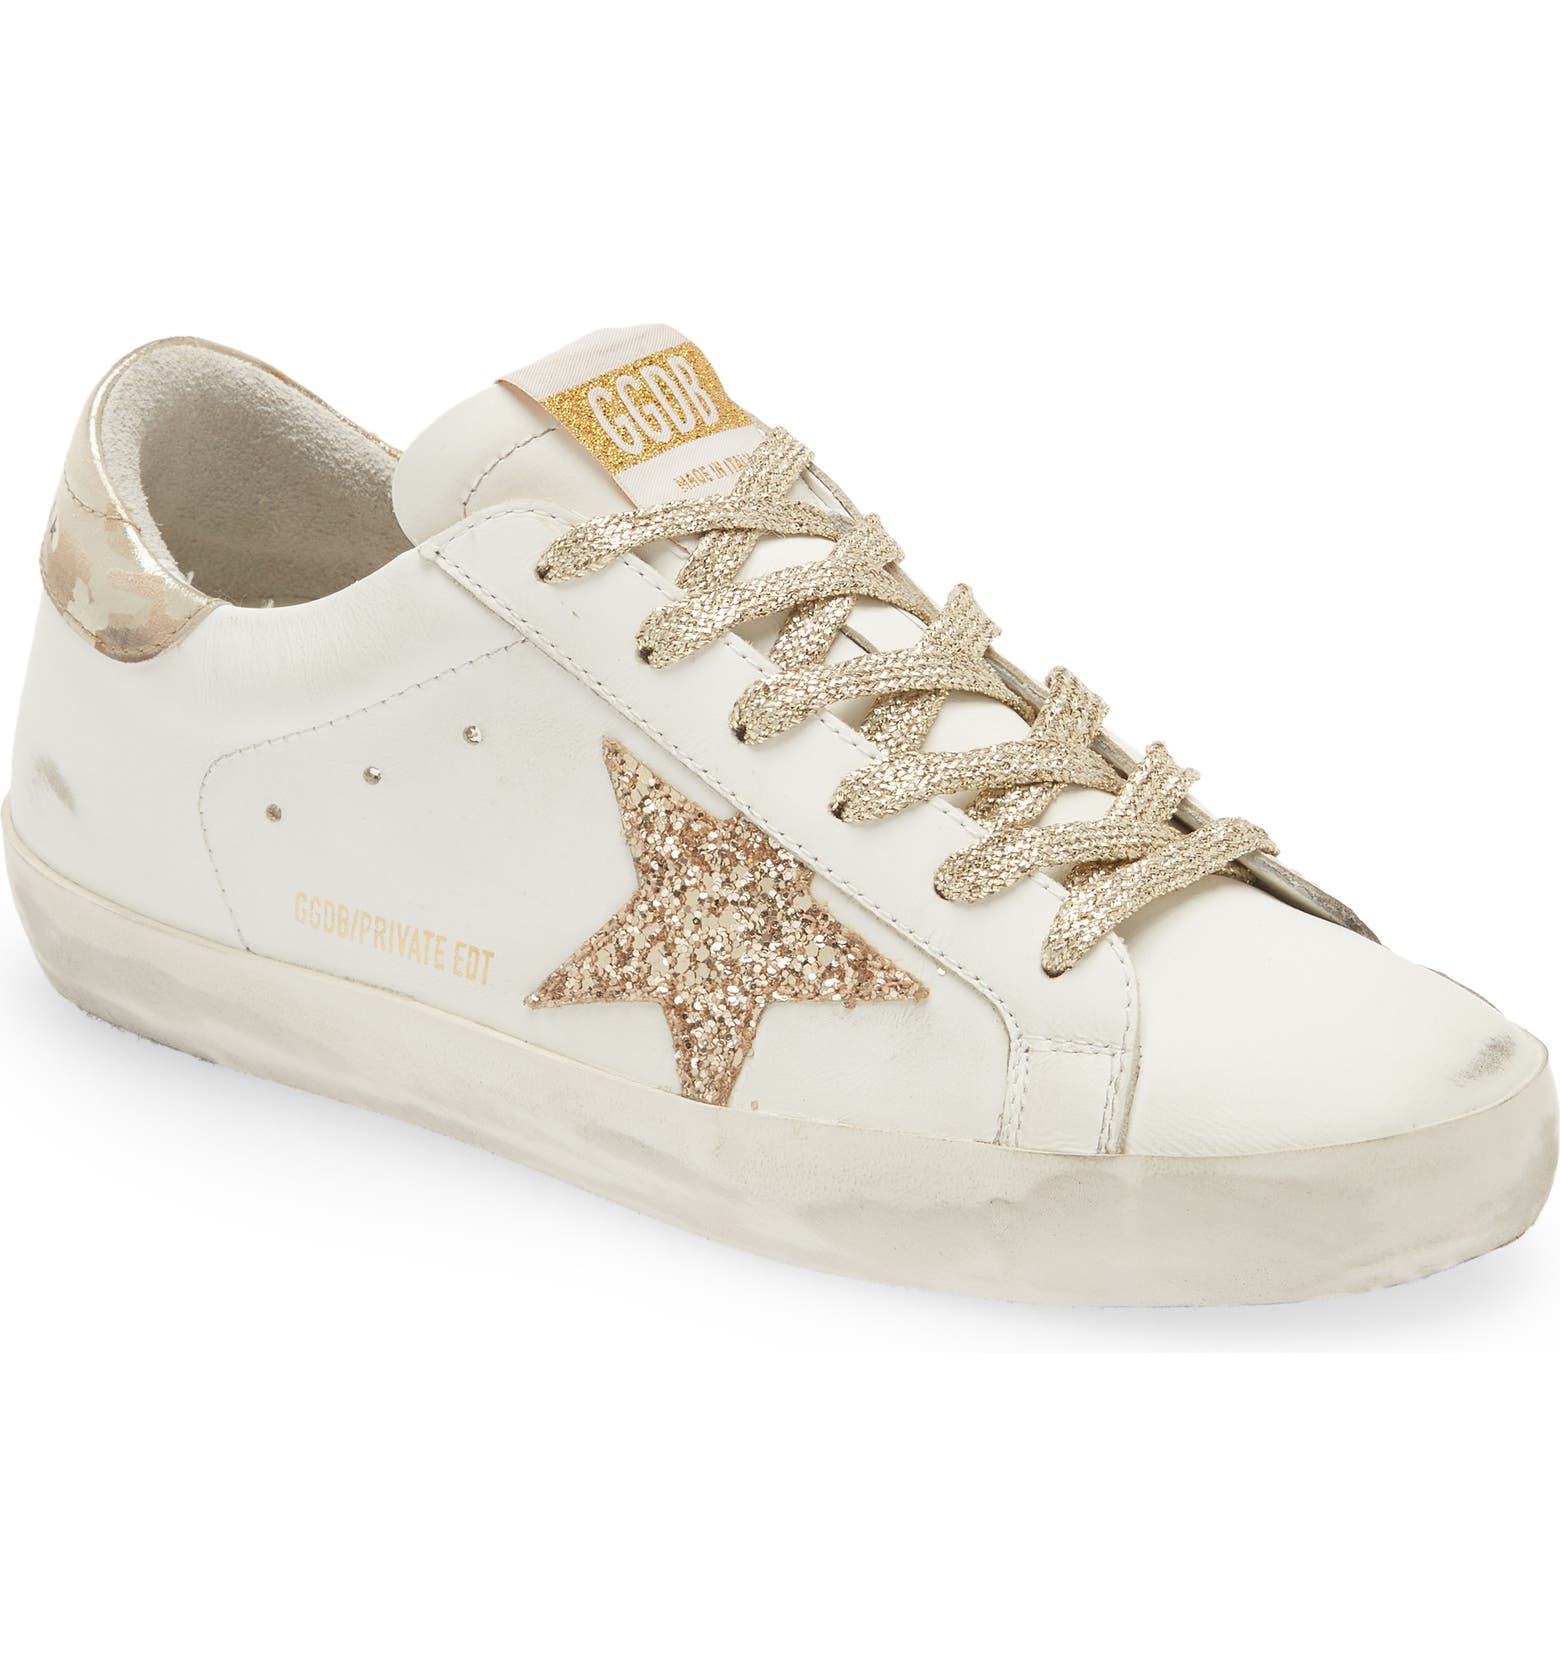 White and gold Golden Goose Super Star sneakers with glitter